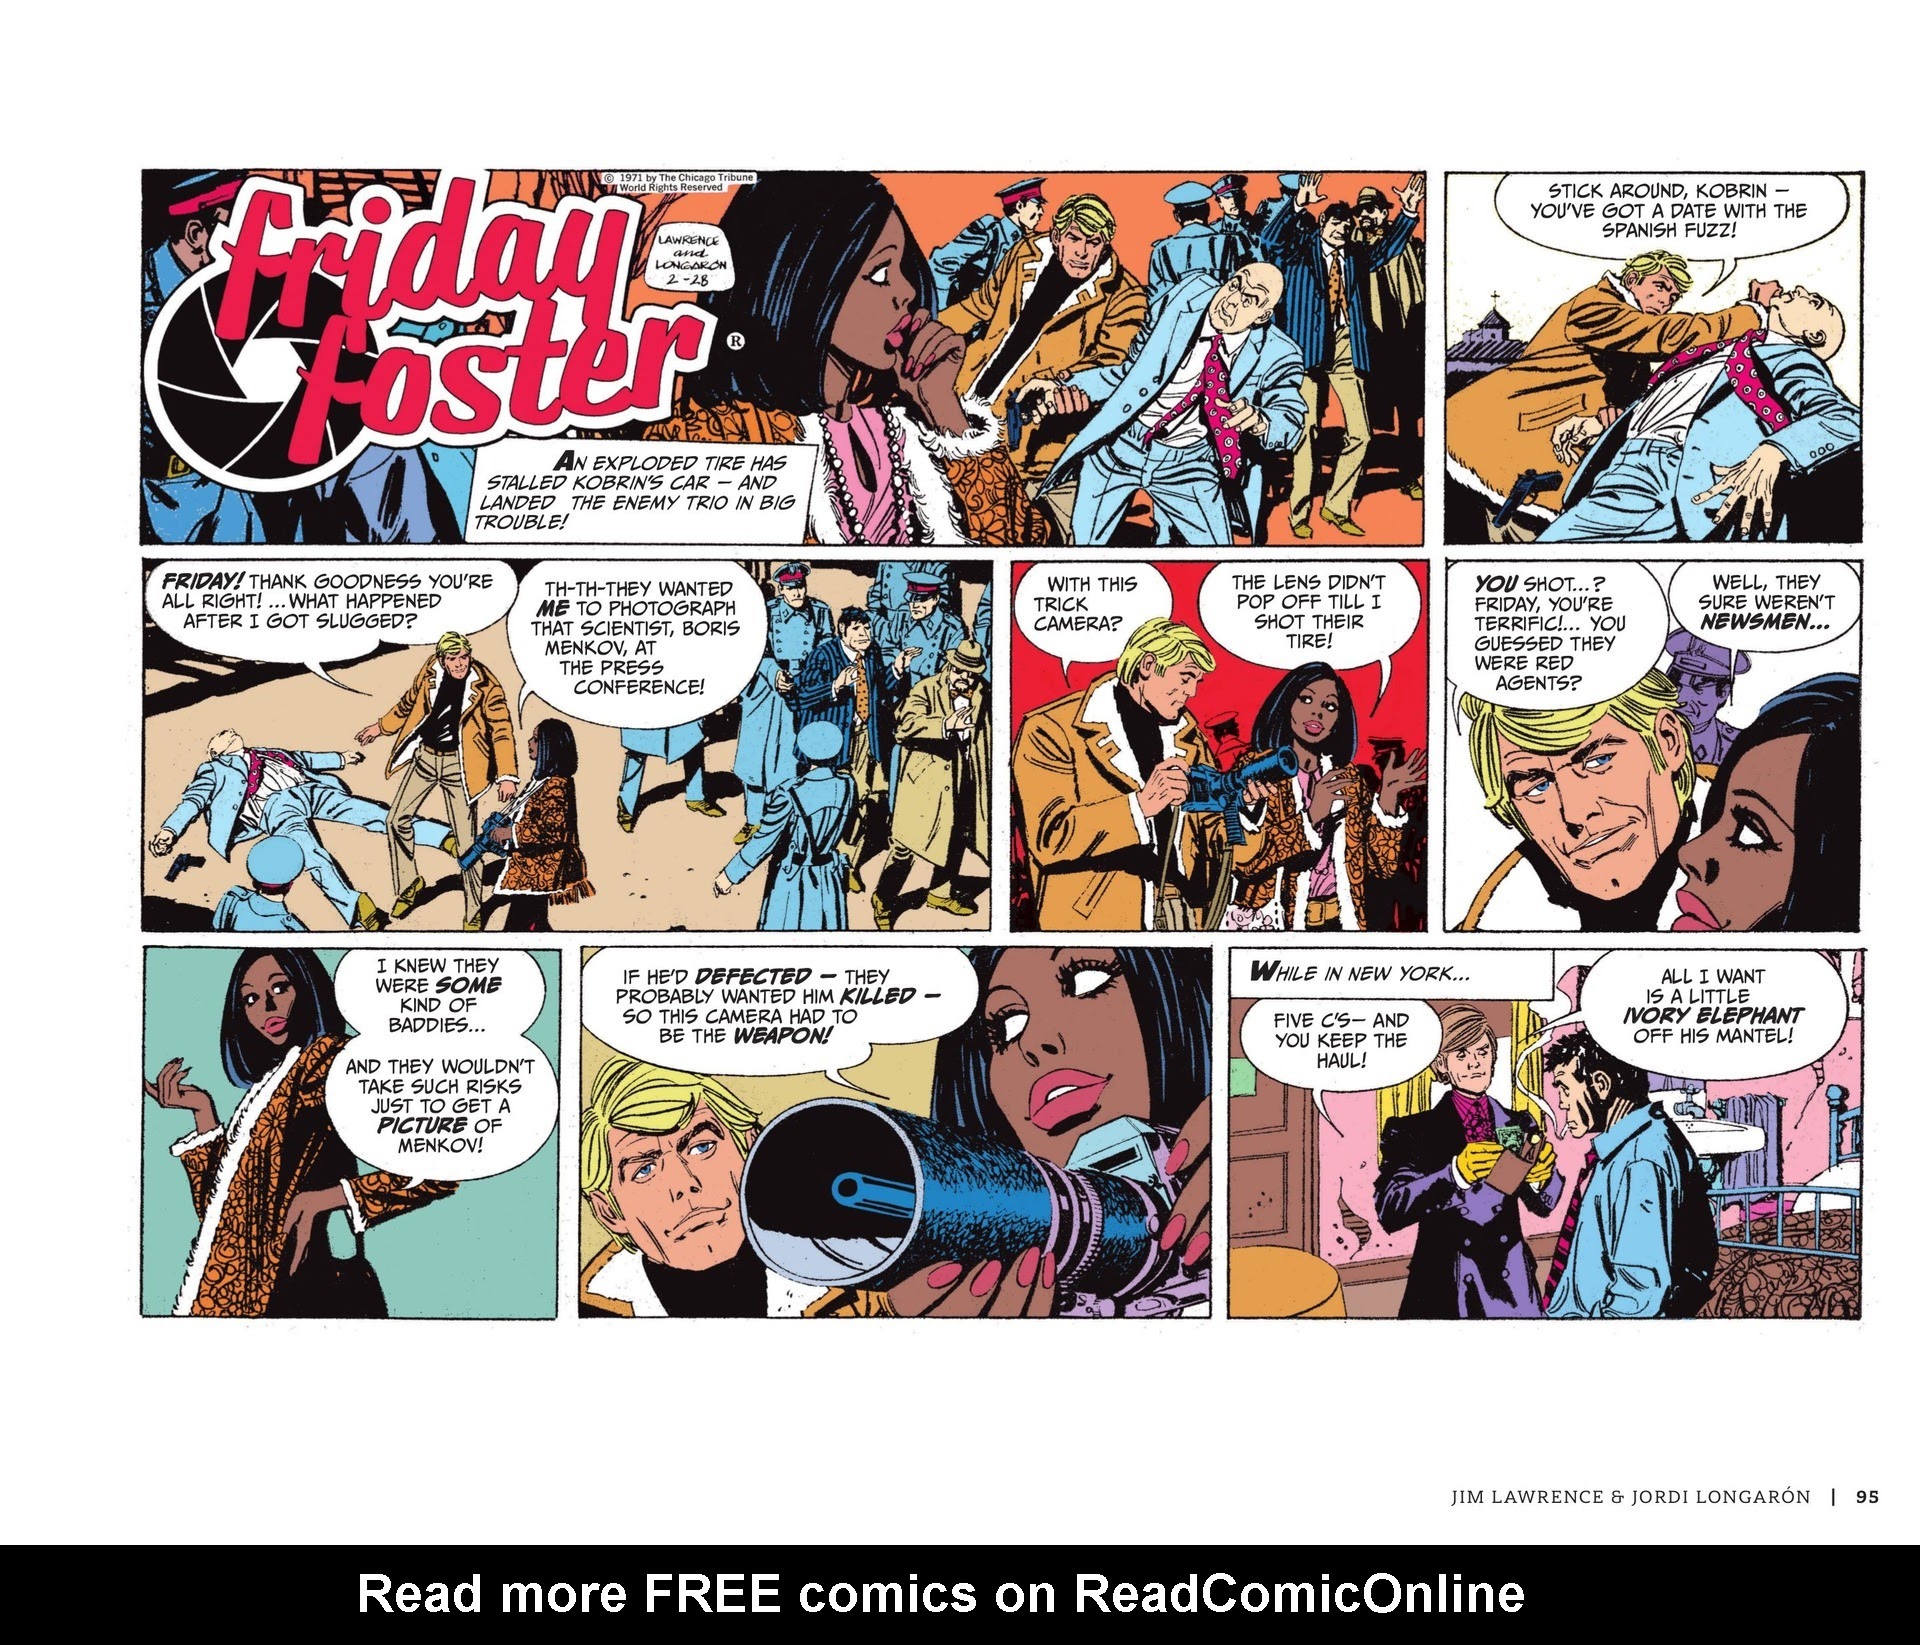 Read online Friday Foster: The Sunday Strips comic -  Issue # TPB (Part 1) - 96